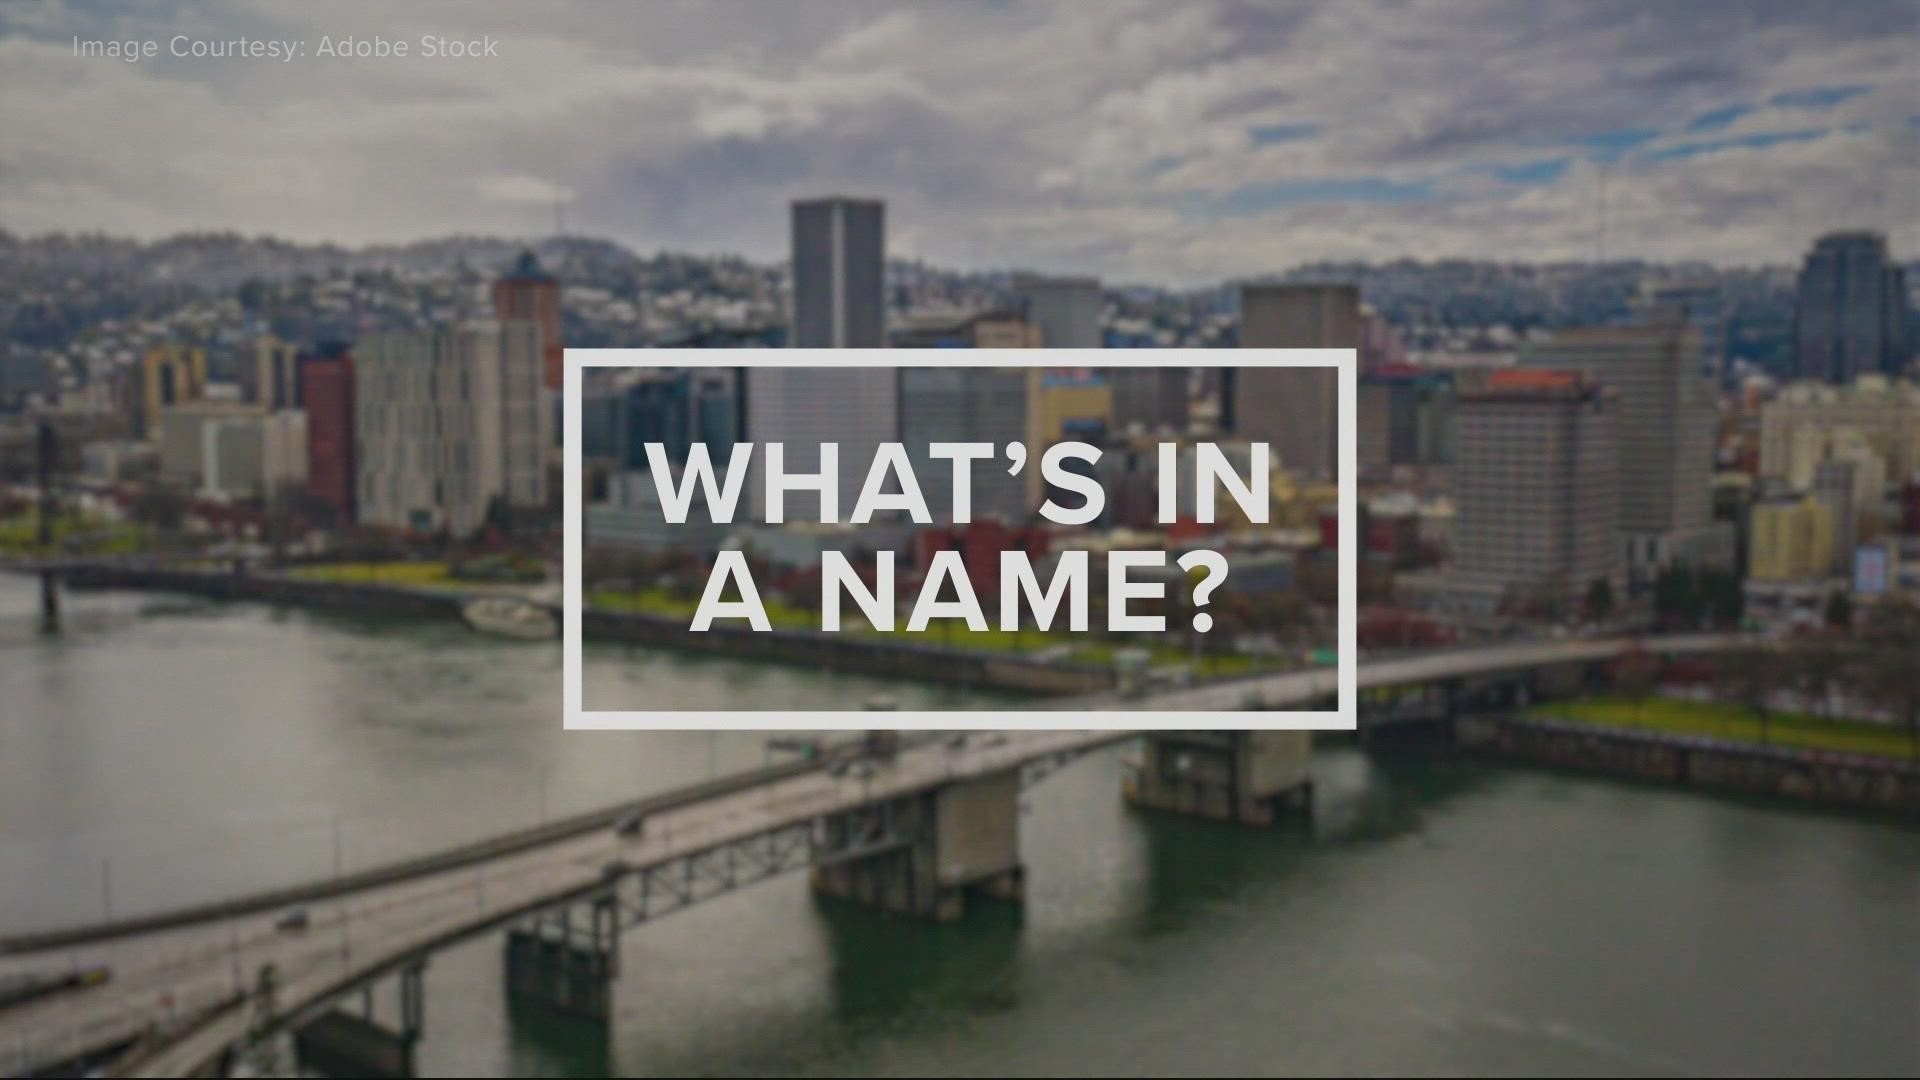 More than 5,000 people moved to Portland over the past year, but did you know that the name of the city was decided by a Copper Penny.